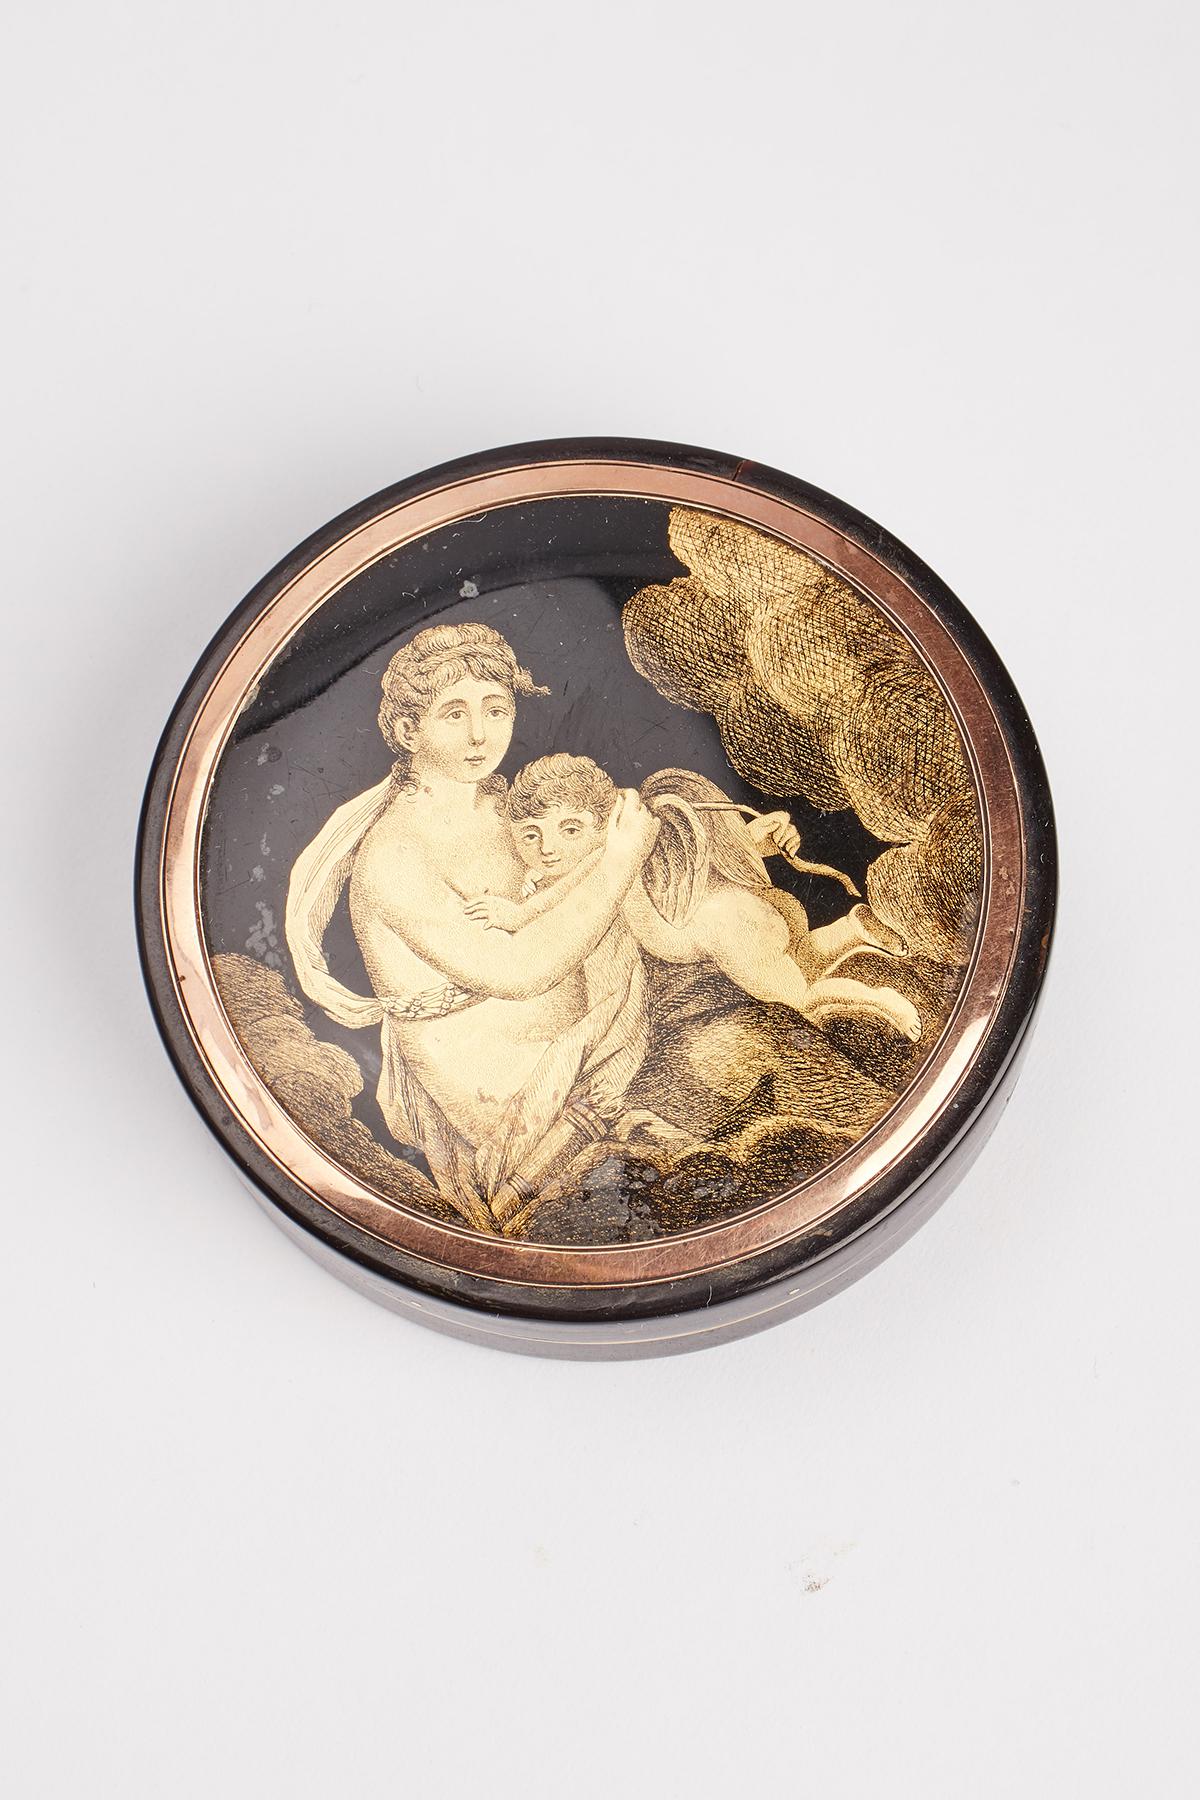 Round 18 K gold and tortoiseshell snuffbox with a miniature in gold ‘fixé’ technique, depicting Venus and Cupid. France, 1809. (SHIP TO EU ONLY)